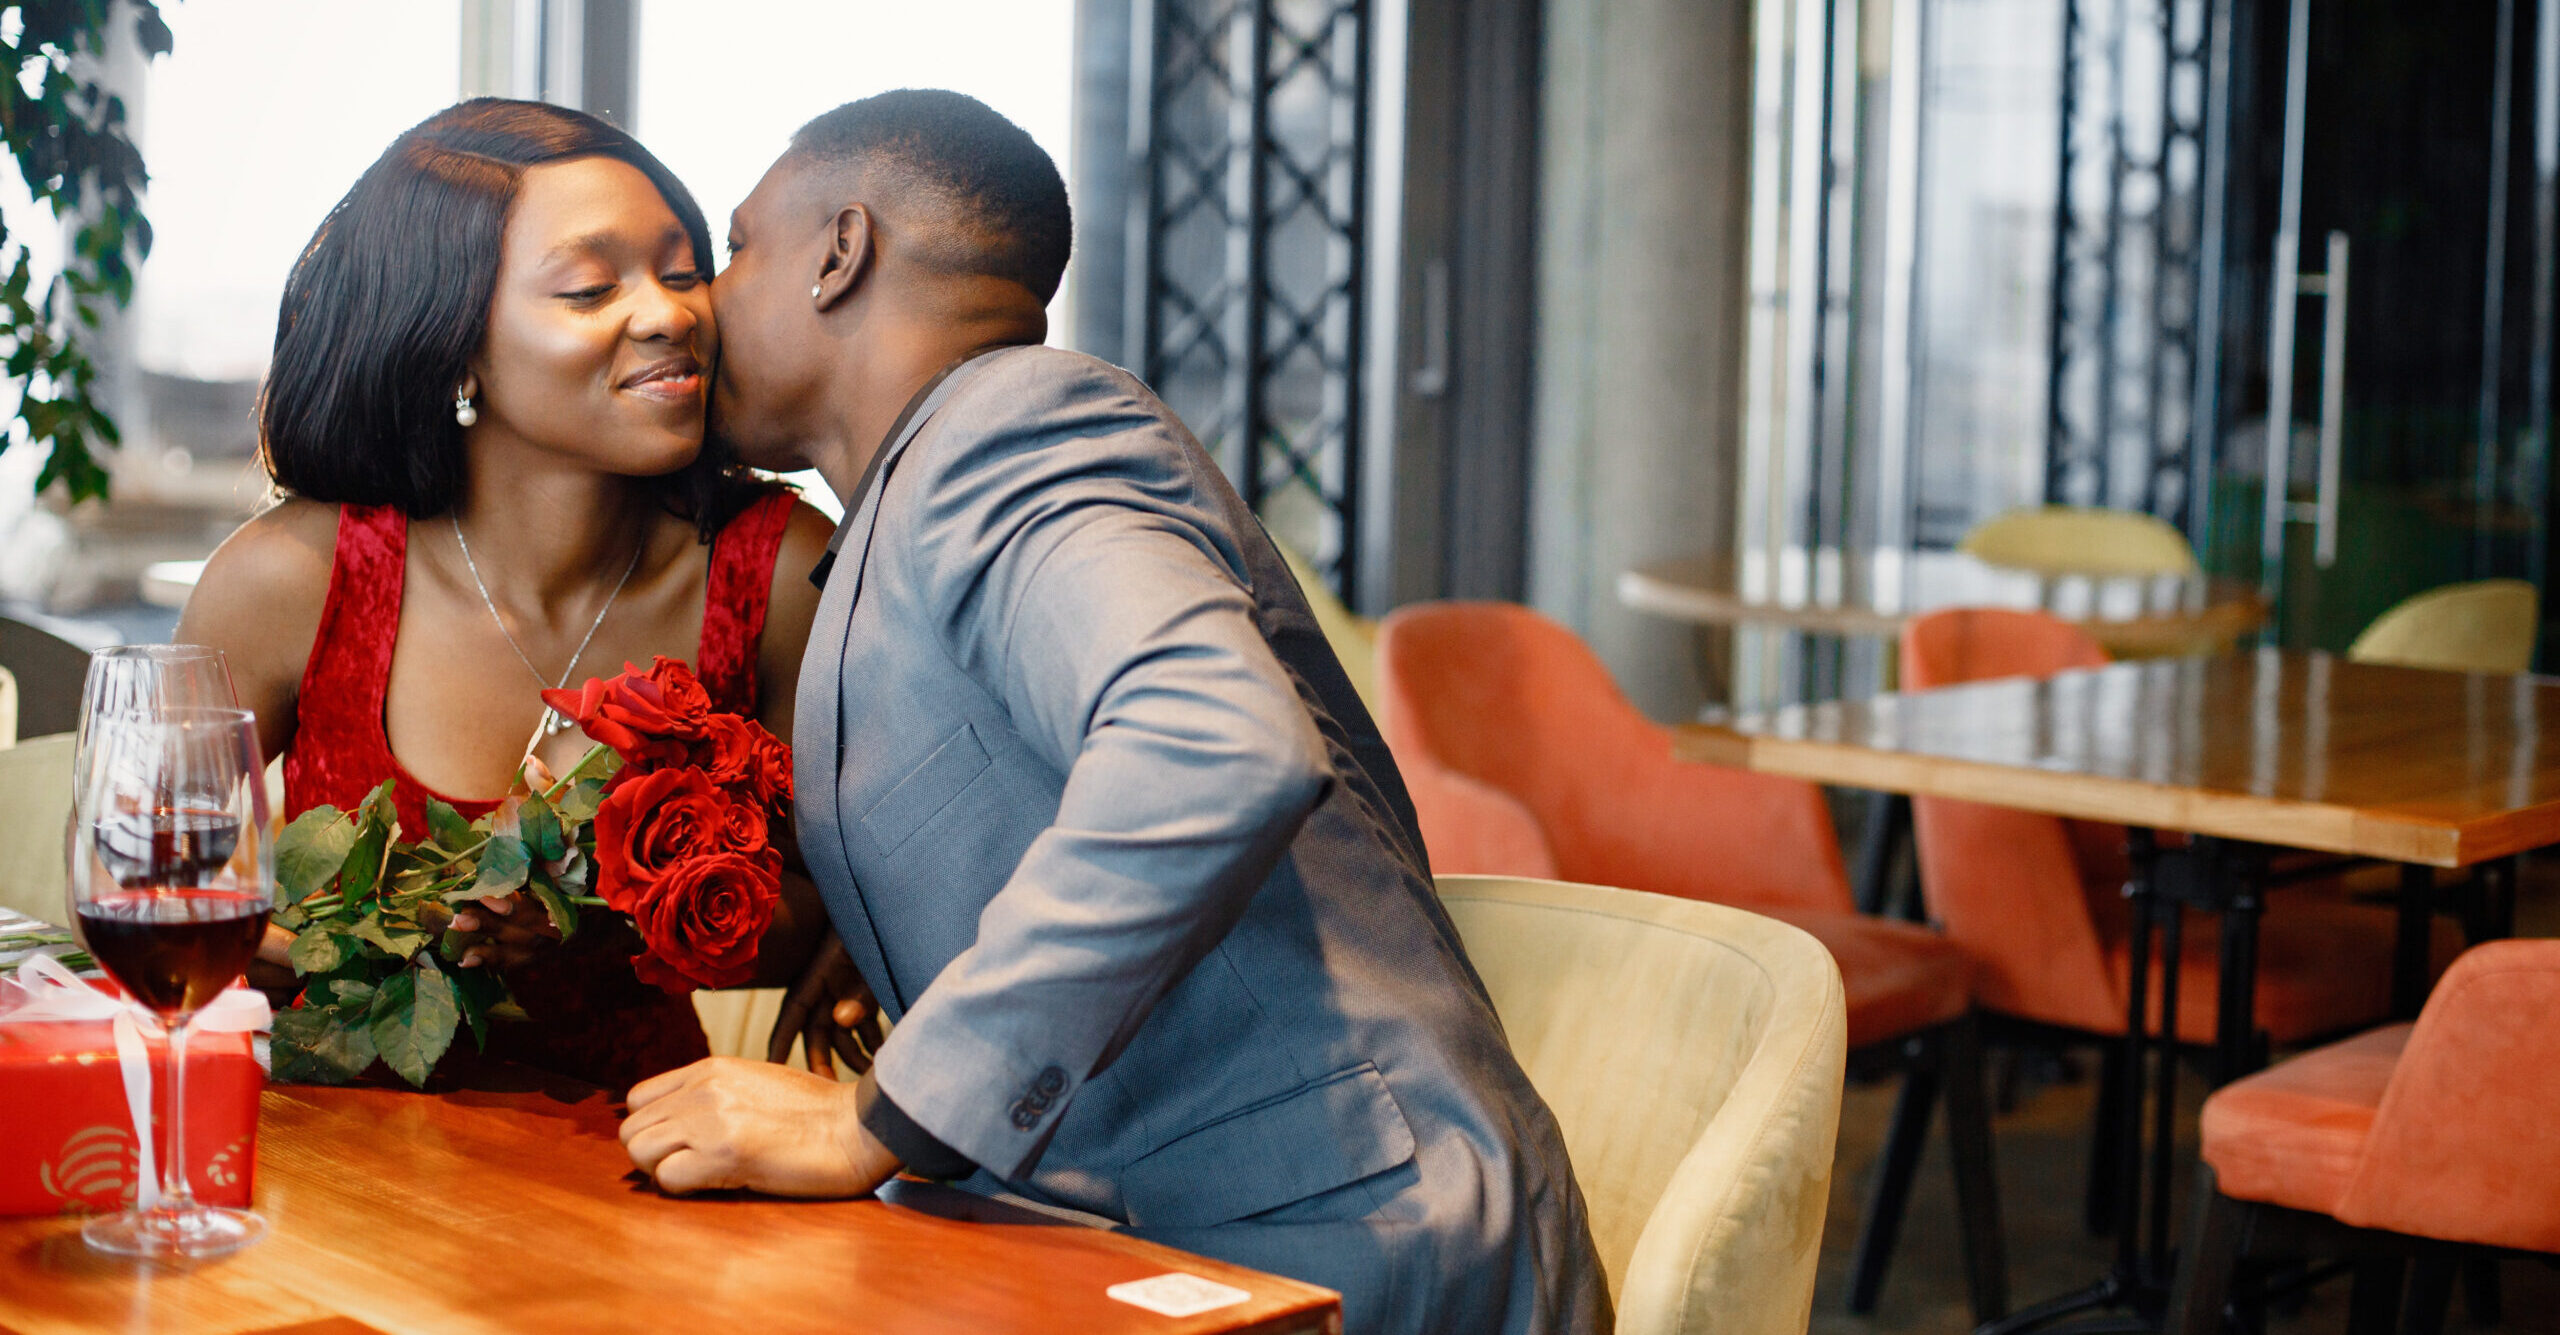 Couple enjoying day out at restaurant. Black man gifted a bouquet of red roses for a woman. Woman wearing red elegant dress and man blue costume.